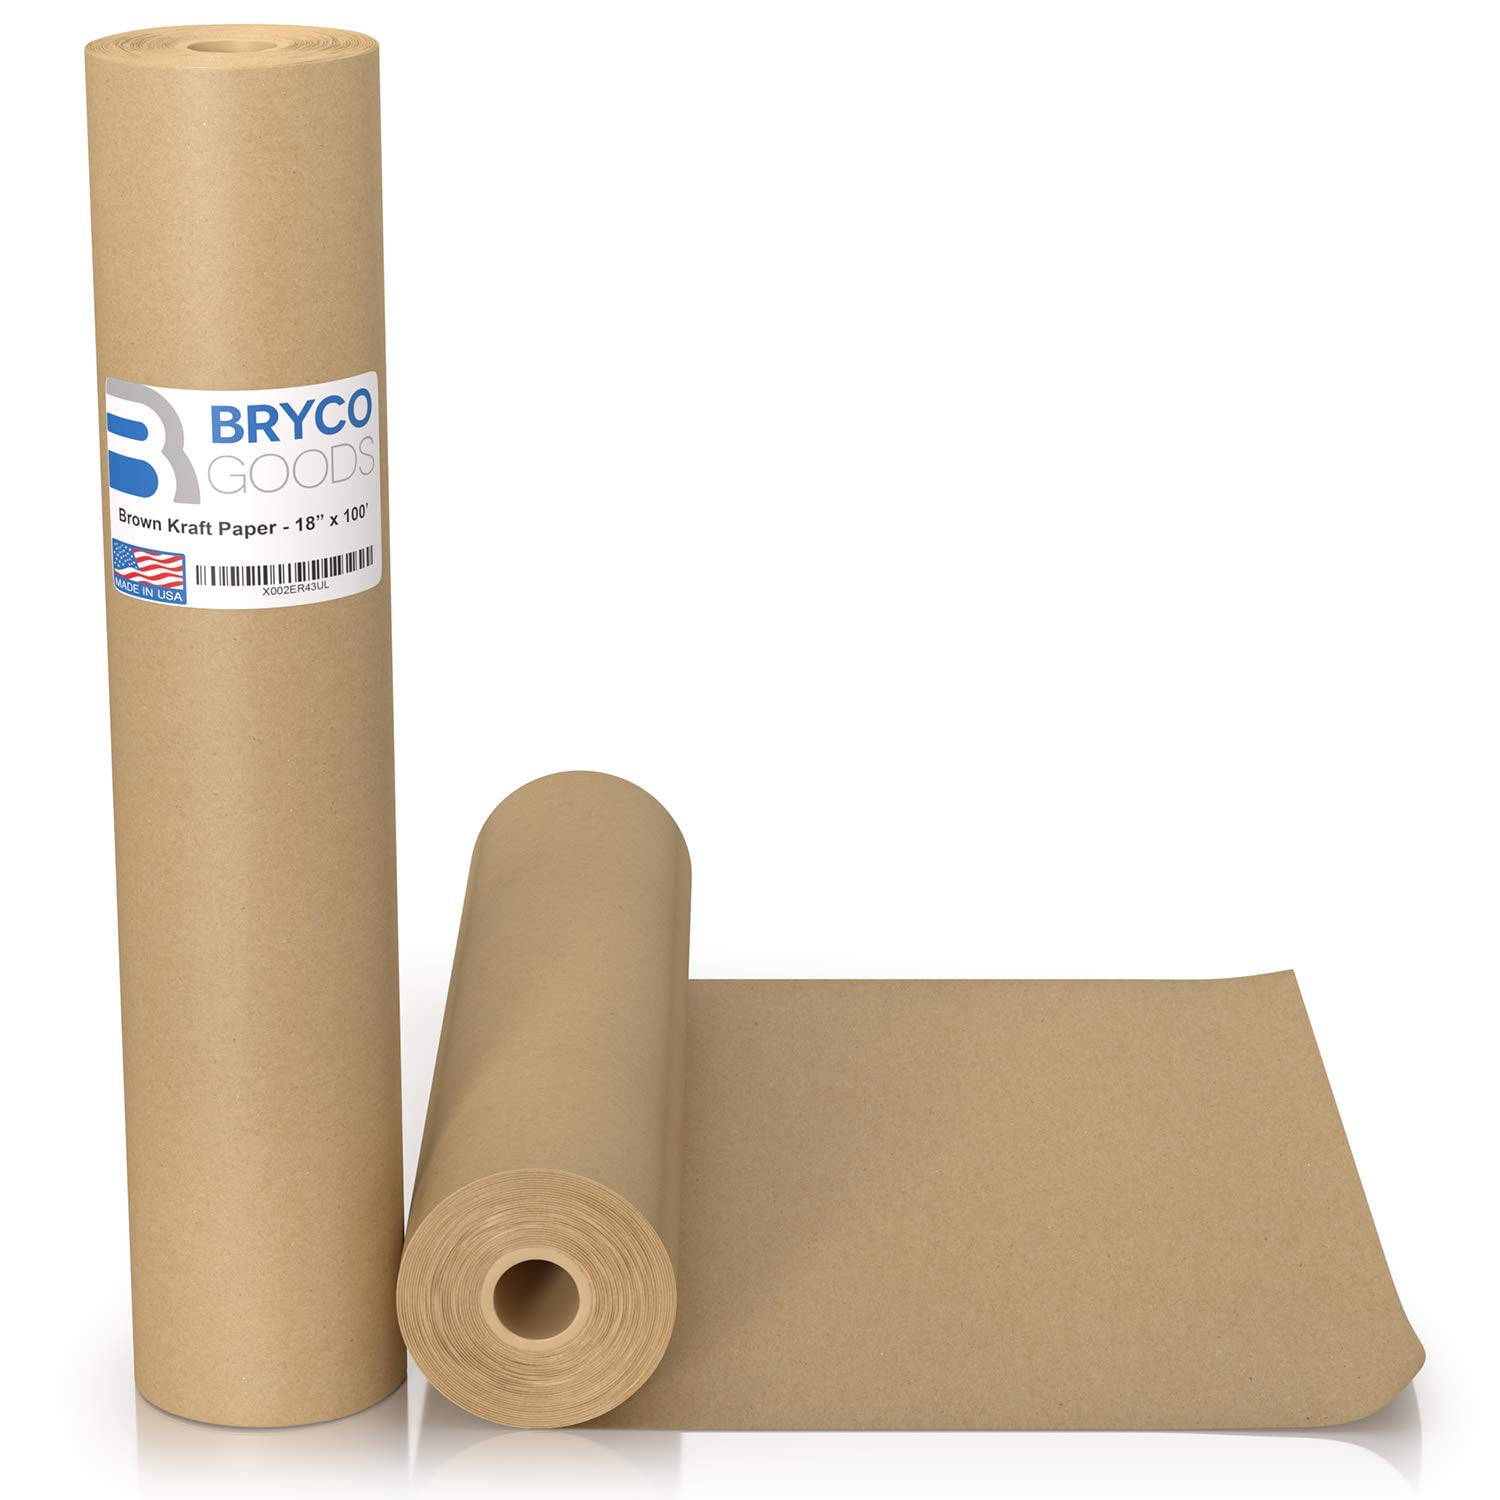 Reynolds Kitchens® Pink Butcher Paper, 225 sq ft - Dillons Food Stores